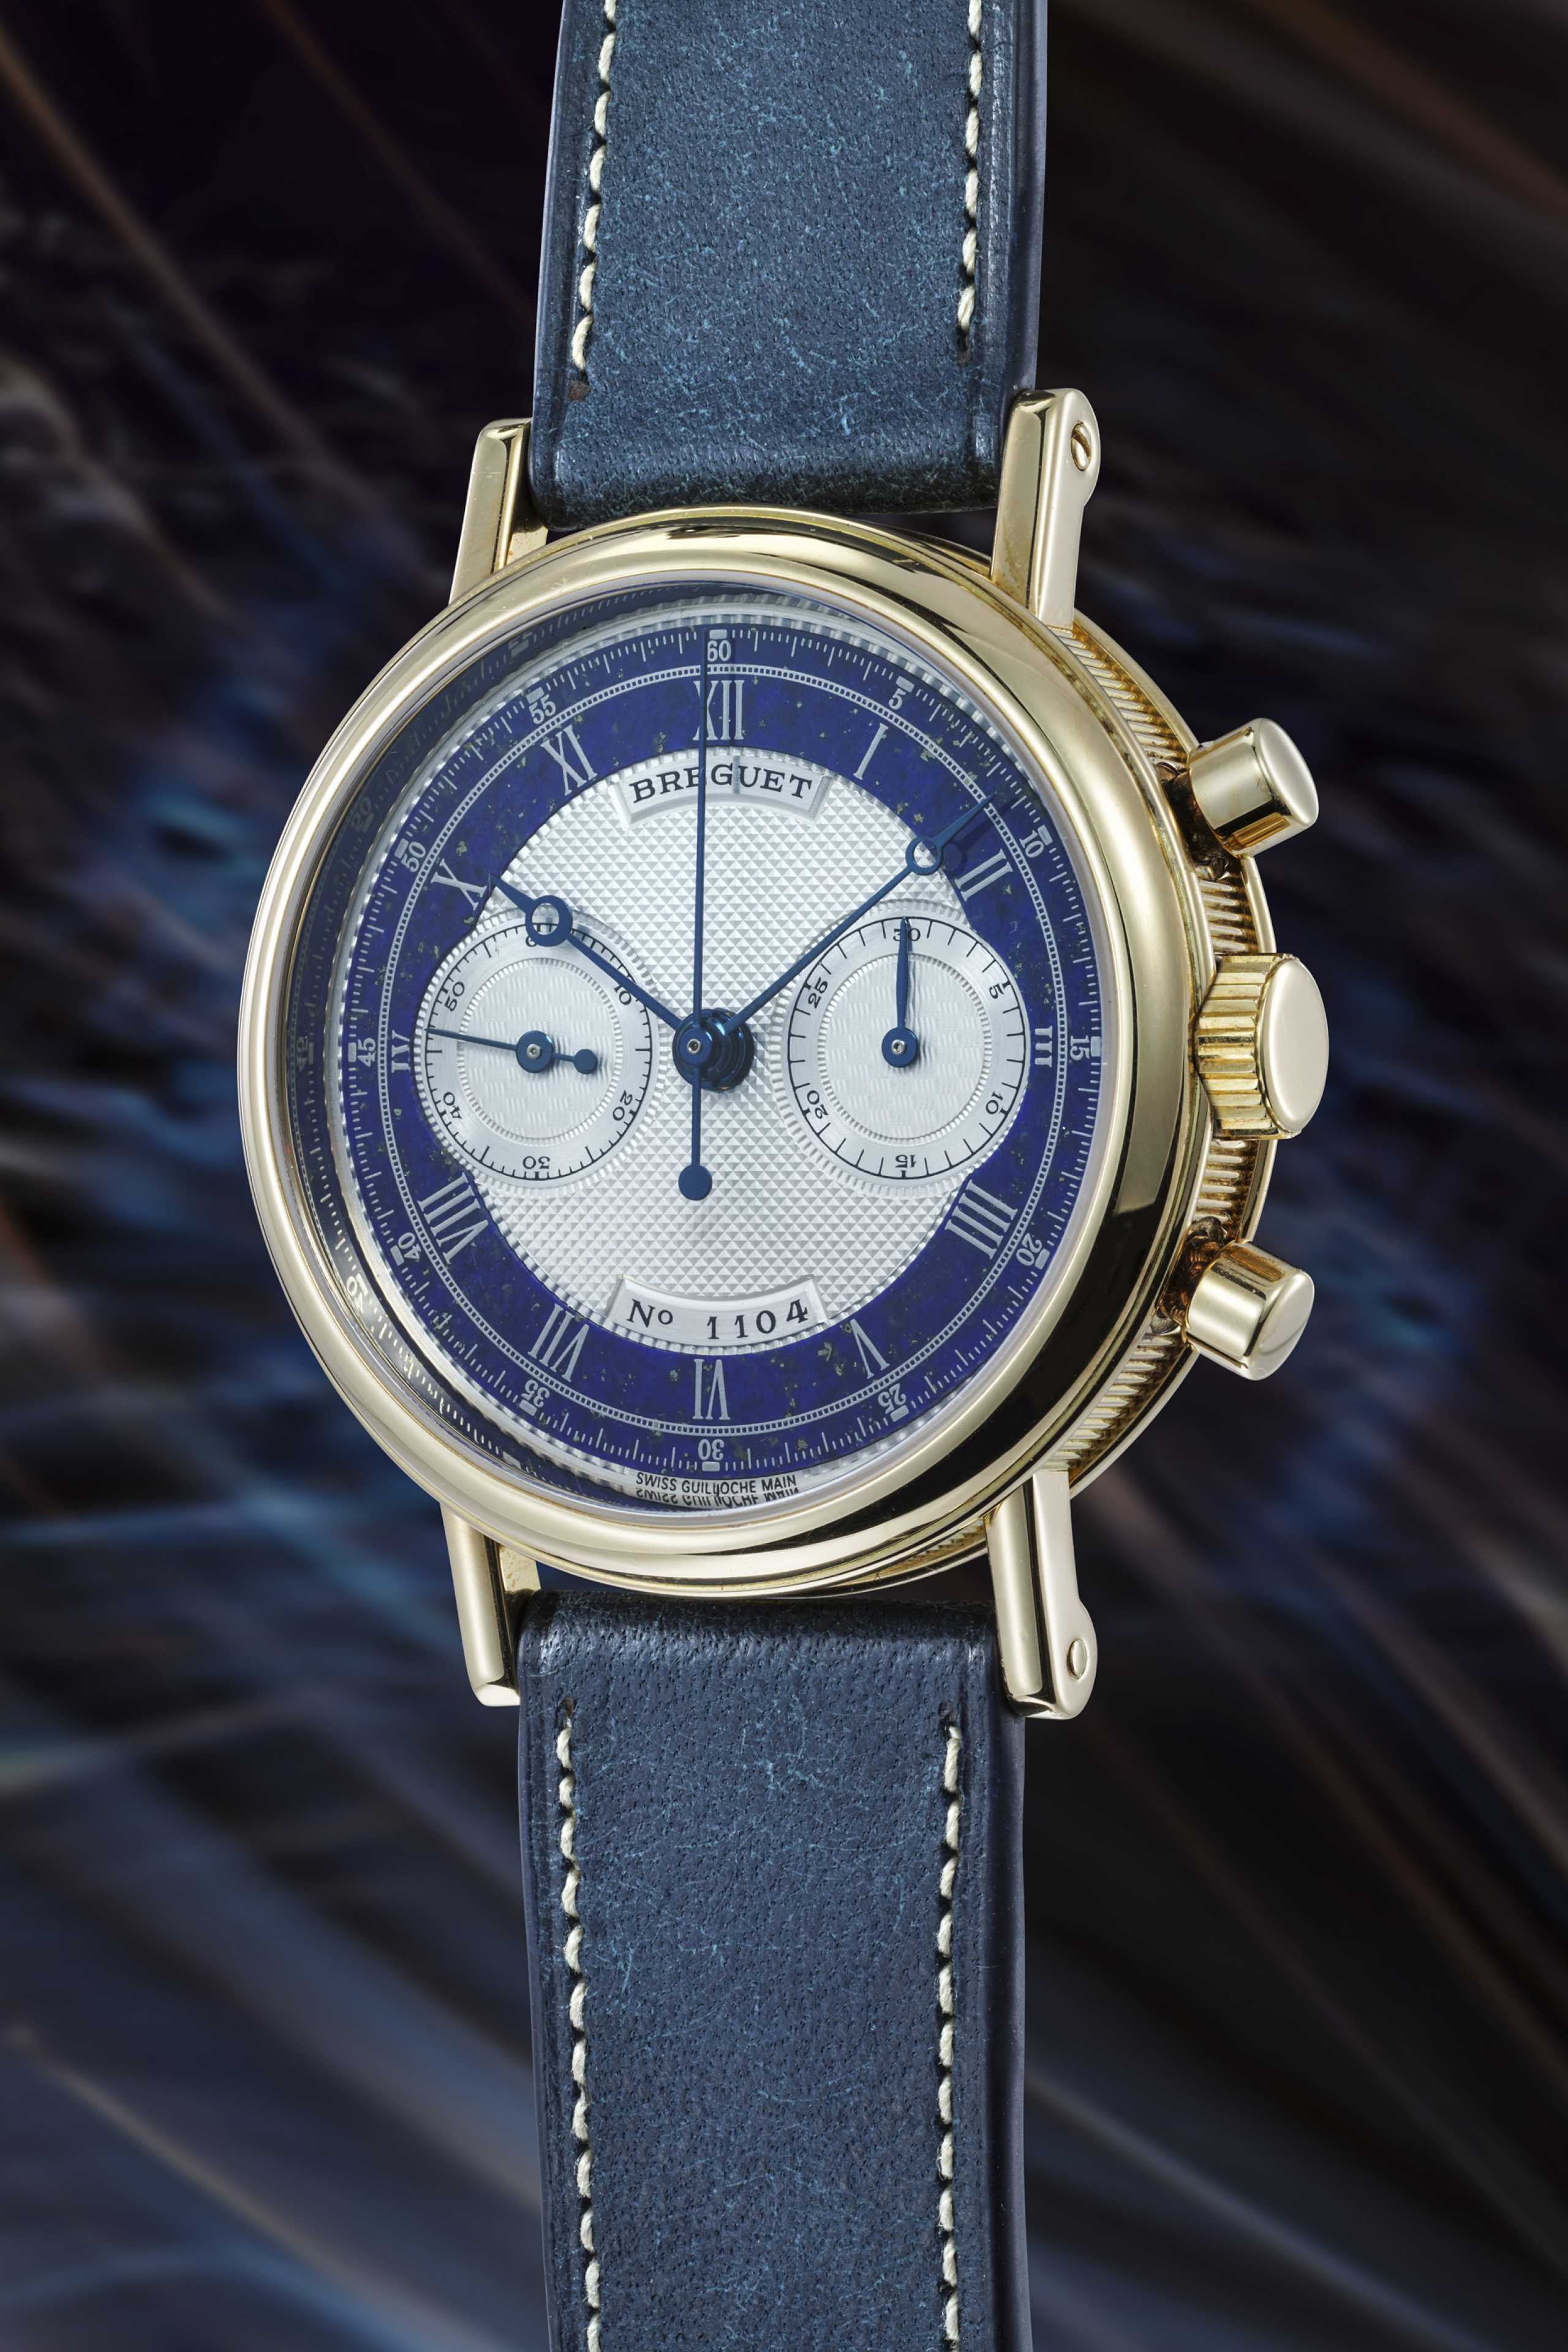 The Geneva Watch Auction: XVIII – the highlights | Square Mile